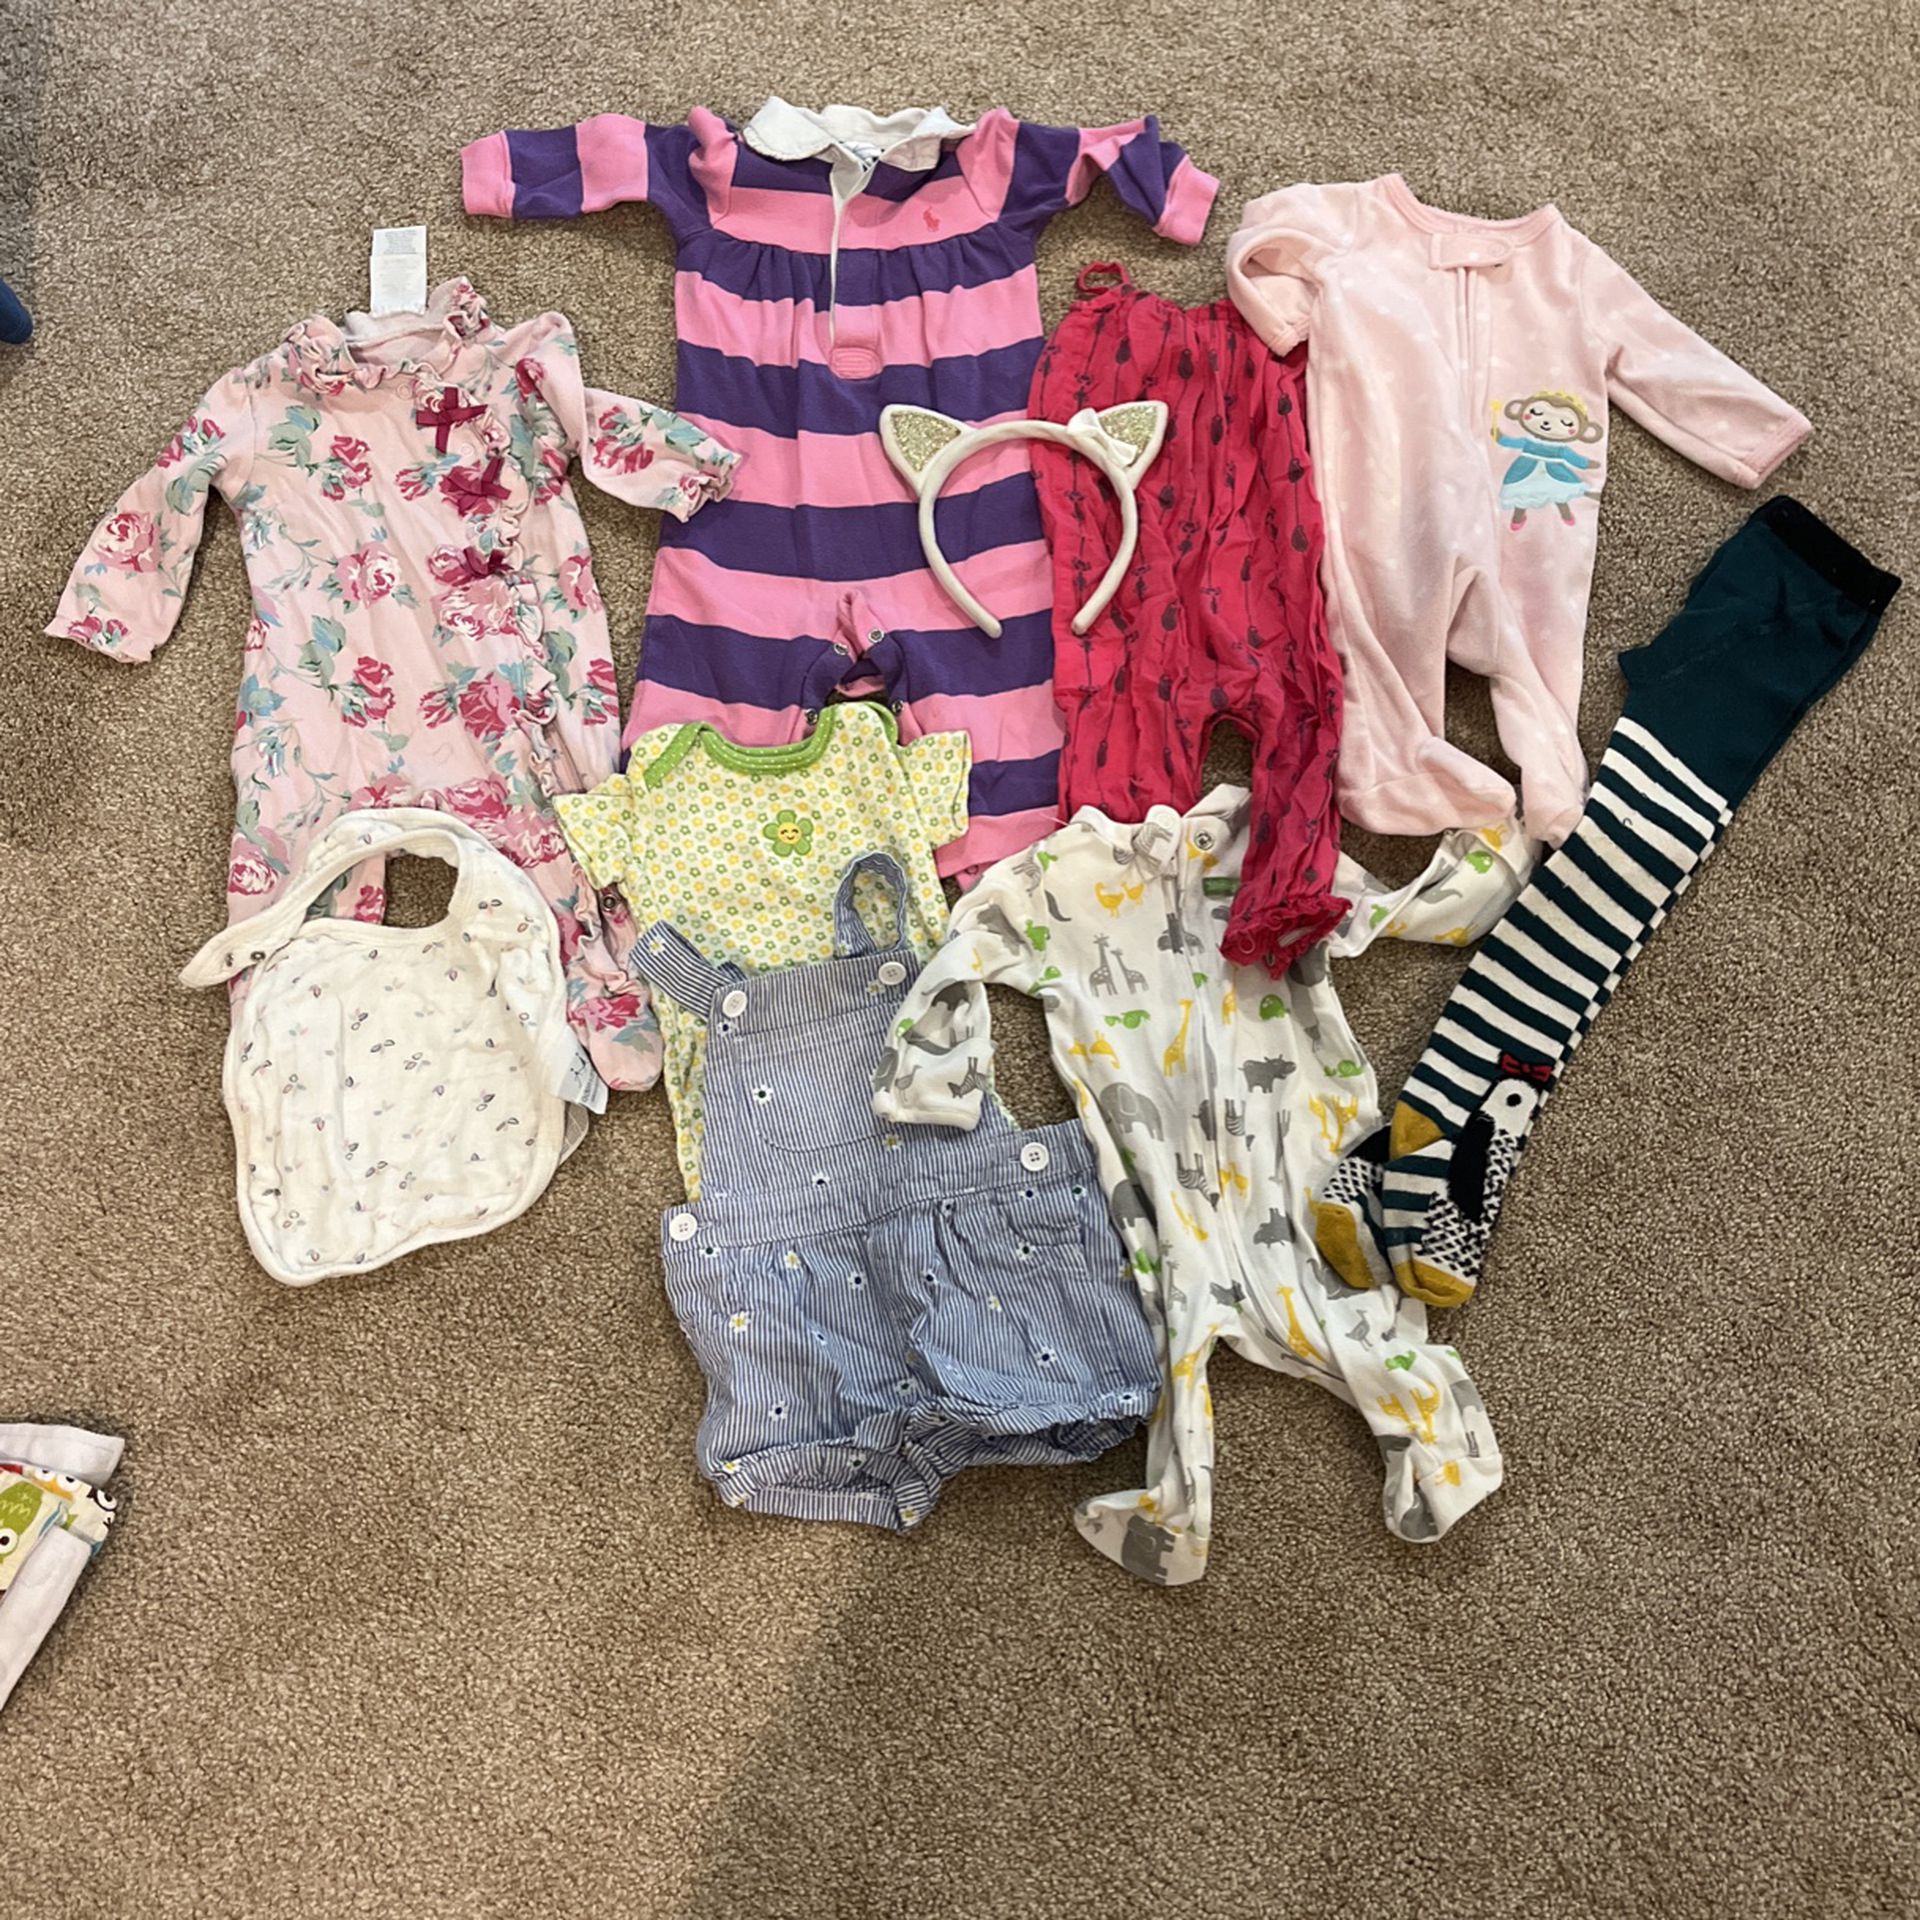 Baby Girl Clothes And Accessories 